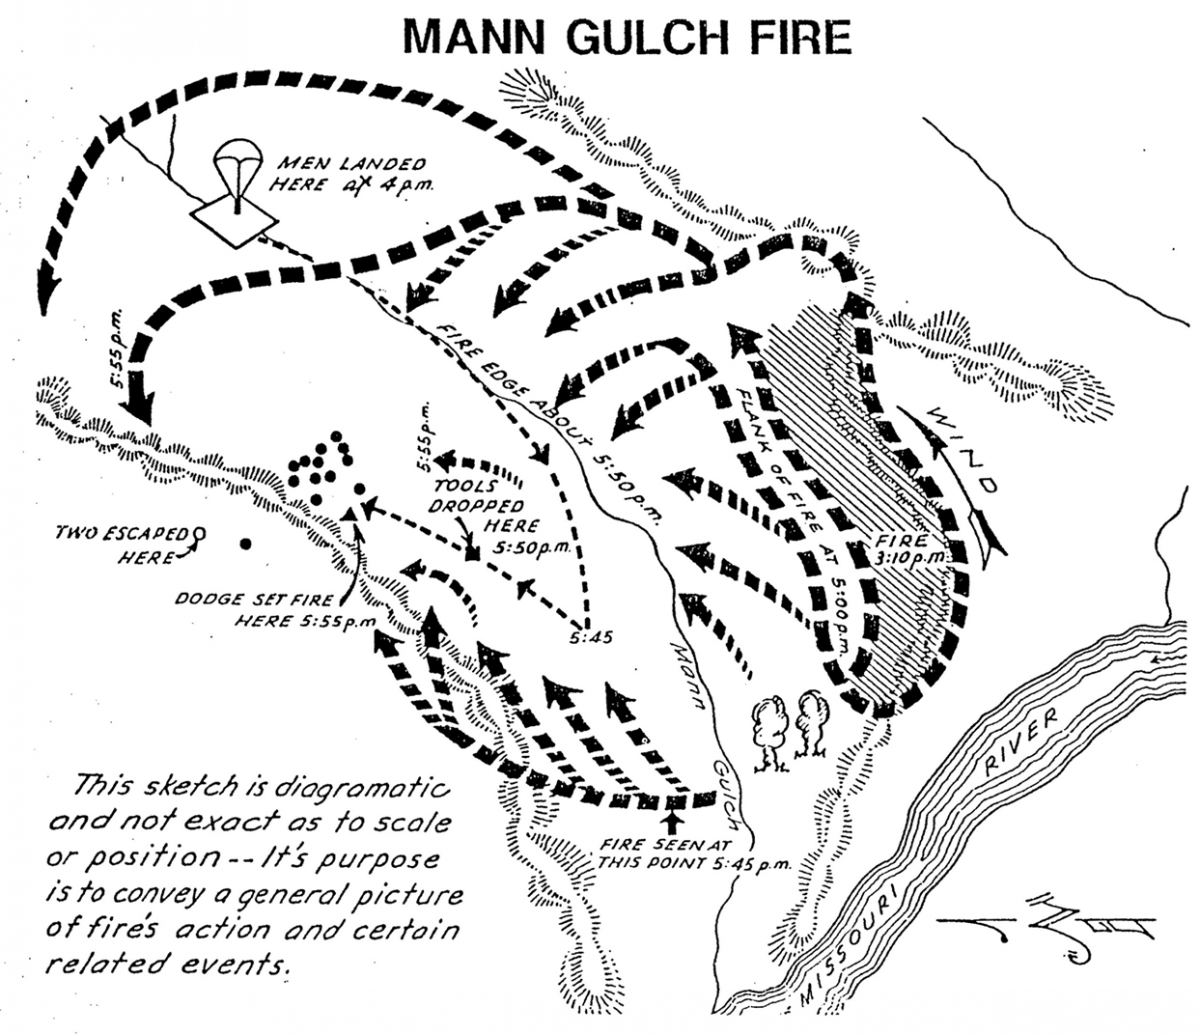 image map of the routes and location of firefighters on the Mann Gulch fire.